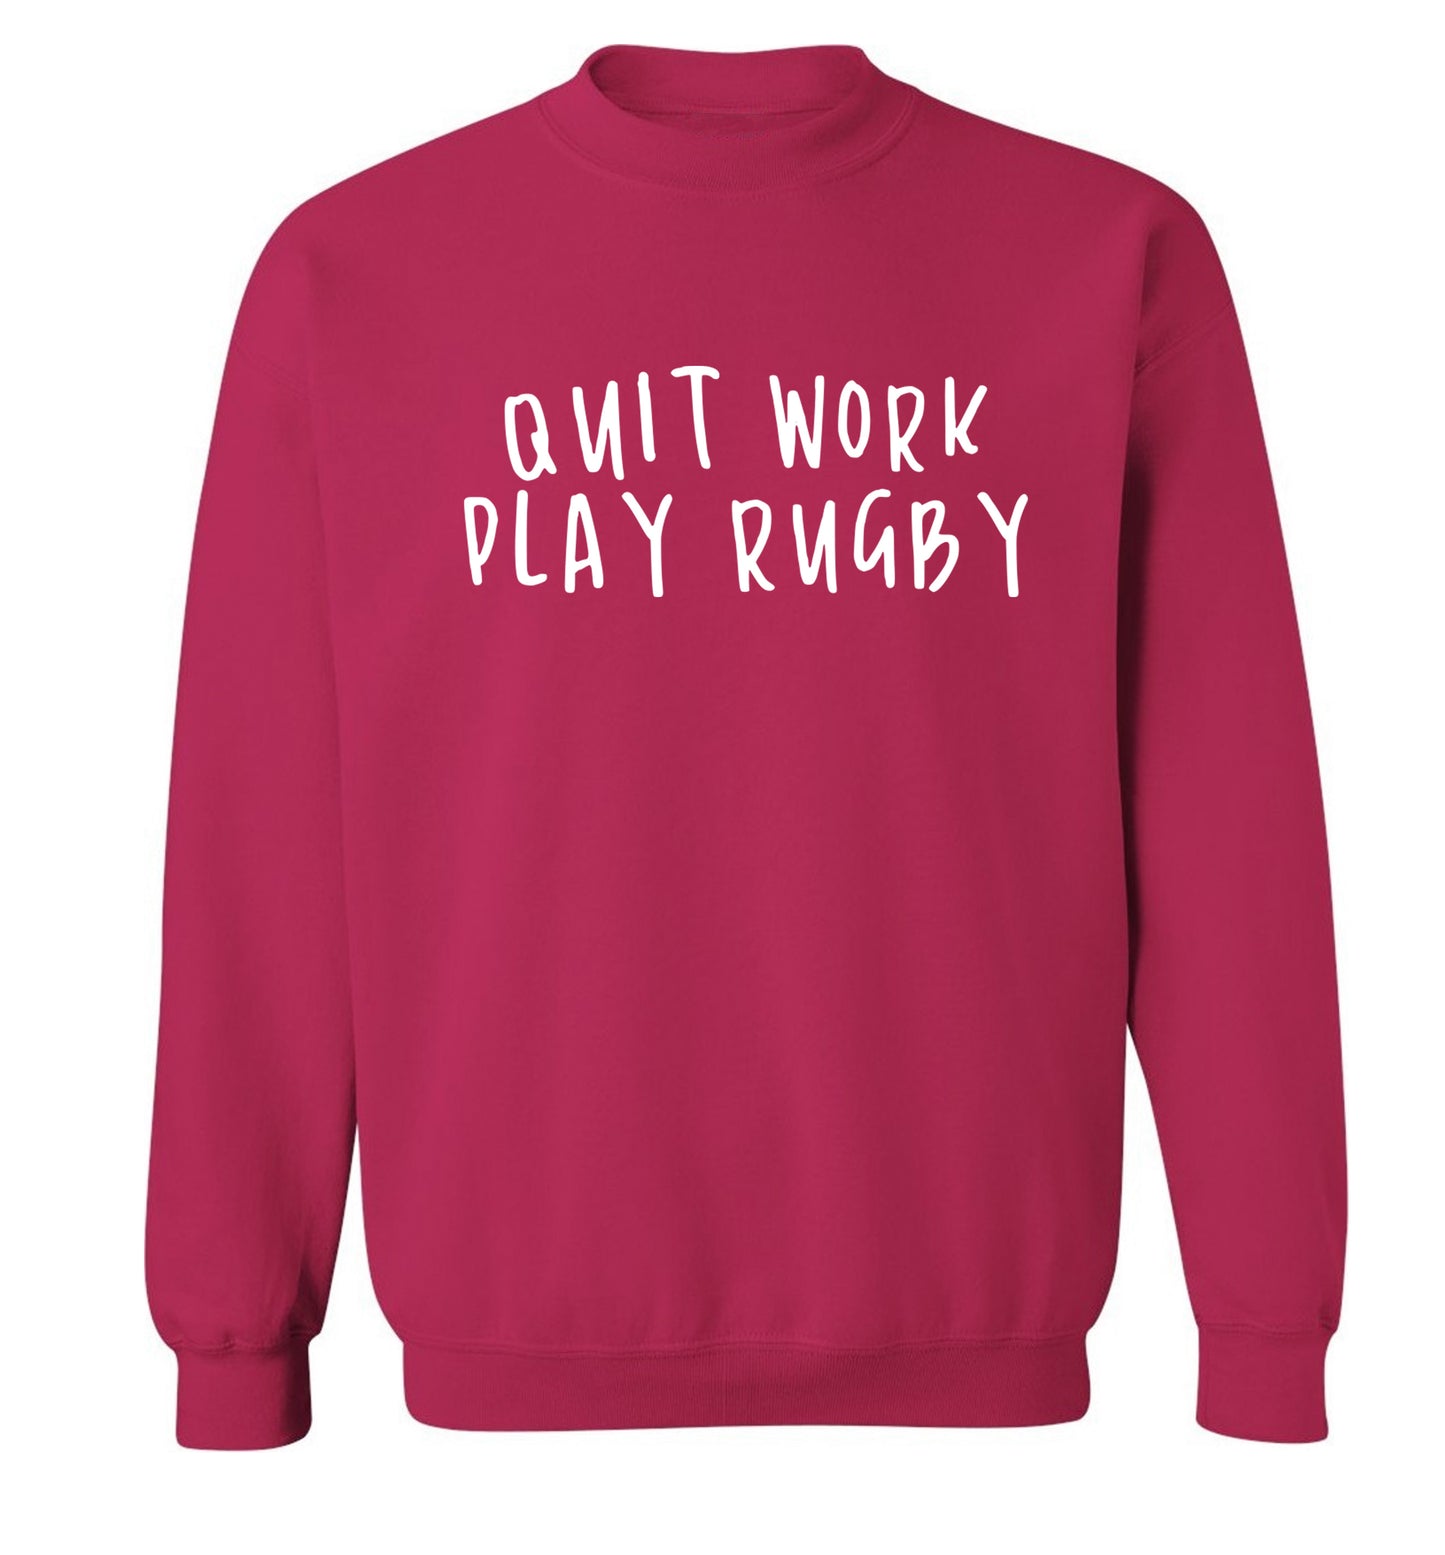 Quit work play rugby Adult's unisex pink Sweater 2XL